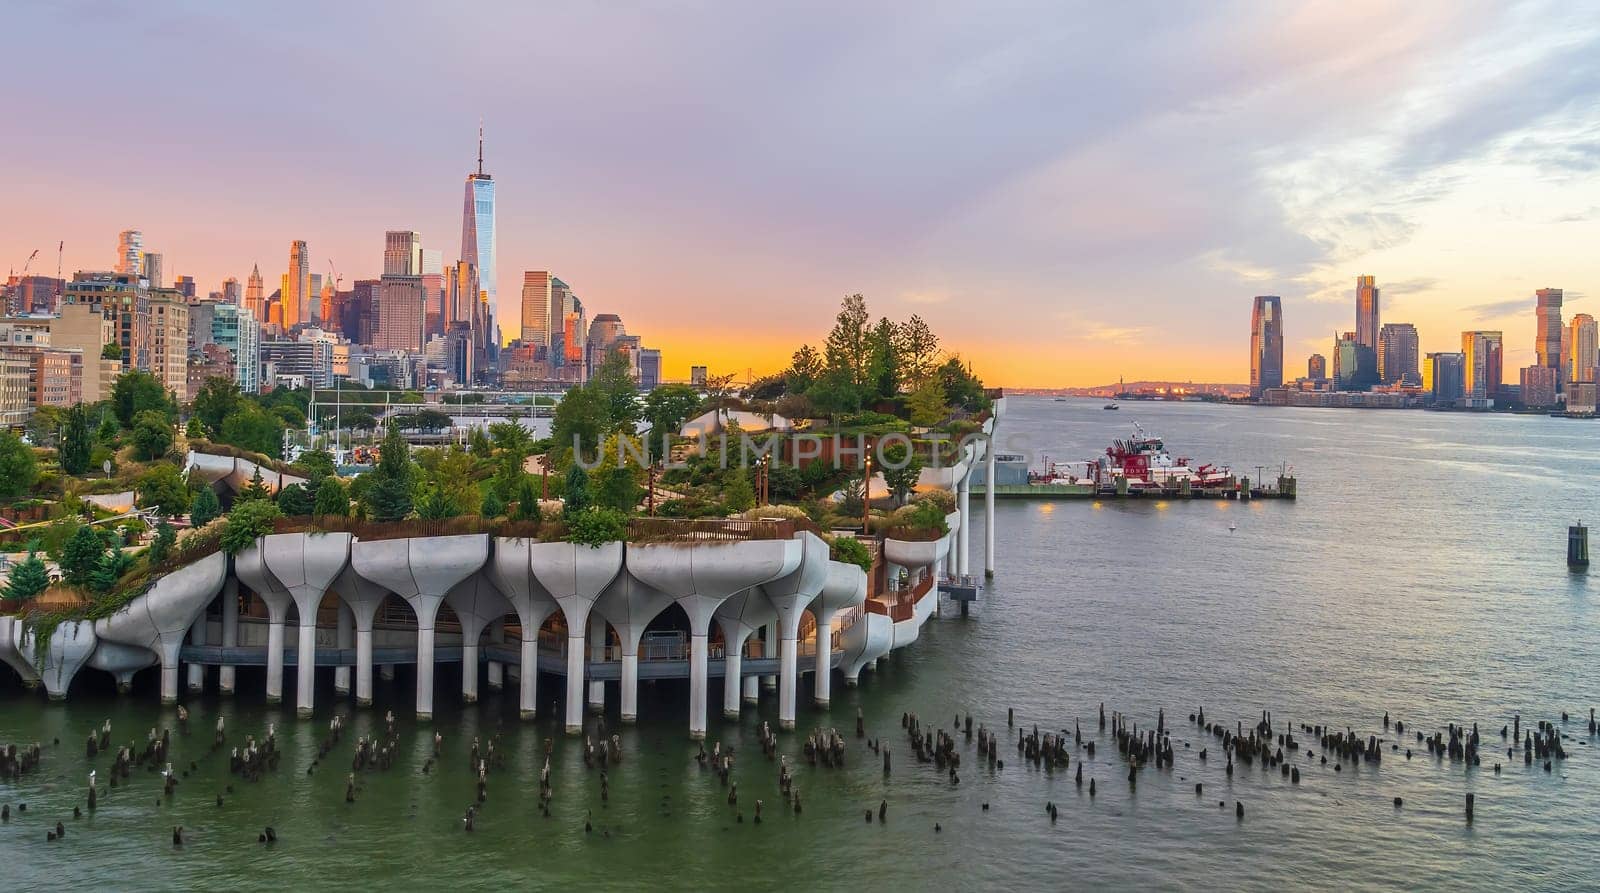 Cityscape of downtown Manhattan skyline with the Little Island Public Park in New York City at sunrise by f11photo